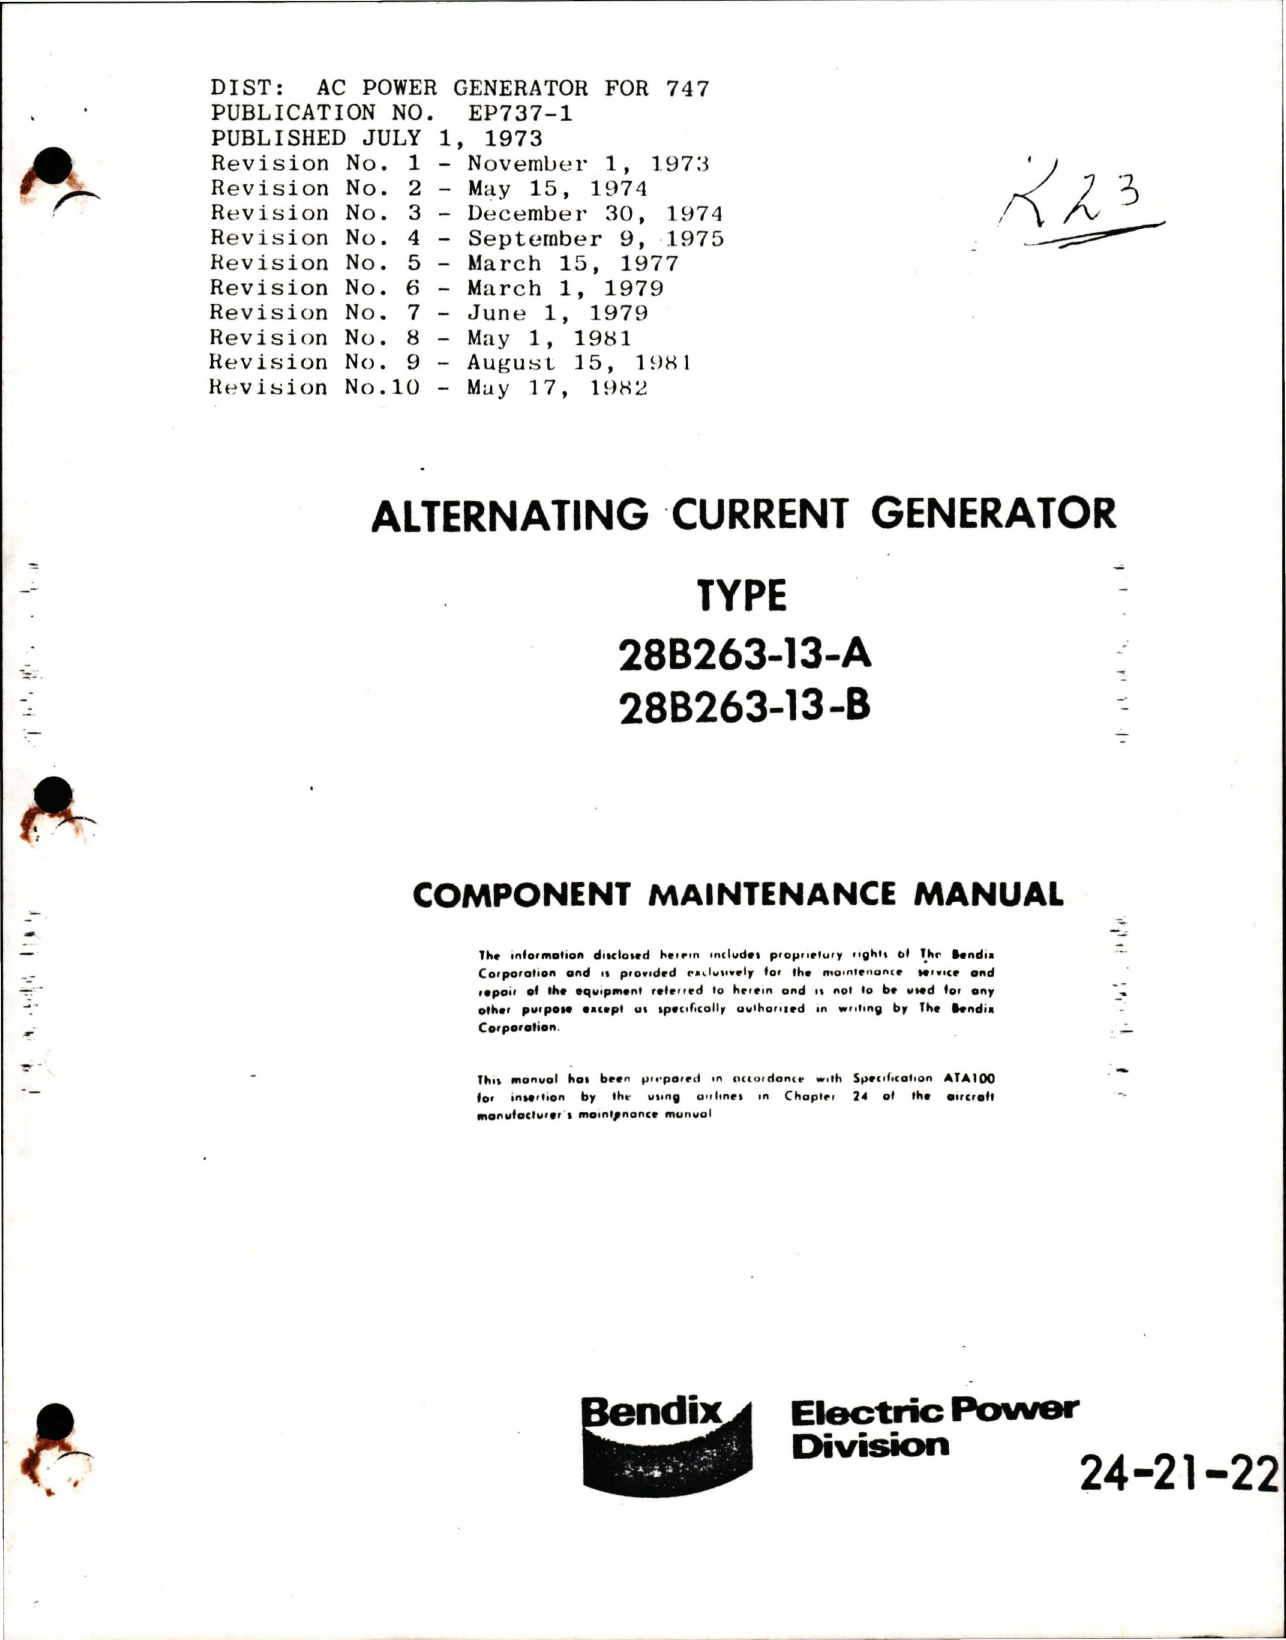 Sample page 1 from AirCorps Library document: Maintenance Manual for Alternating Current Generator - Type 28B263-13-A and 28B263-13-B